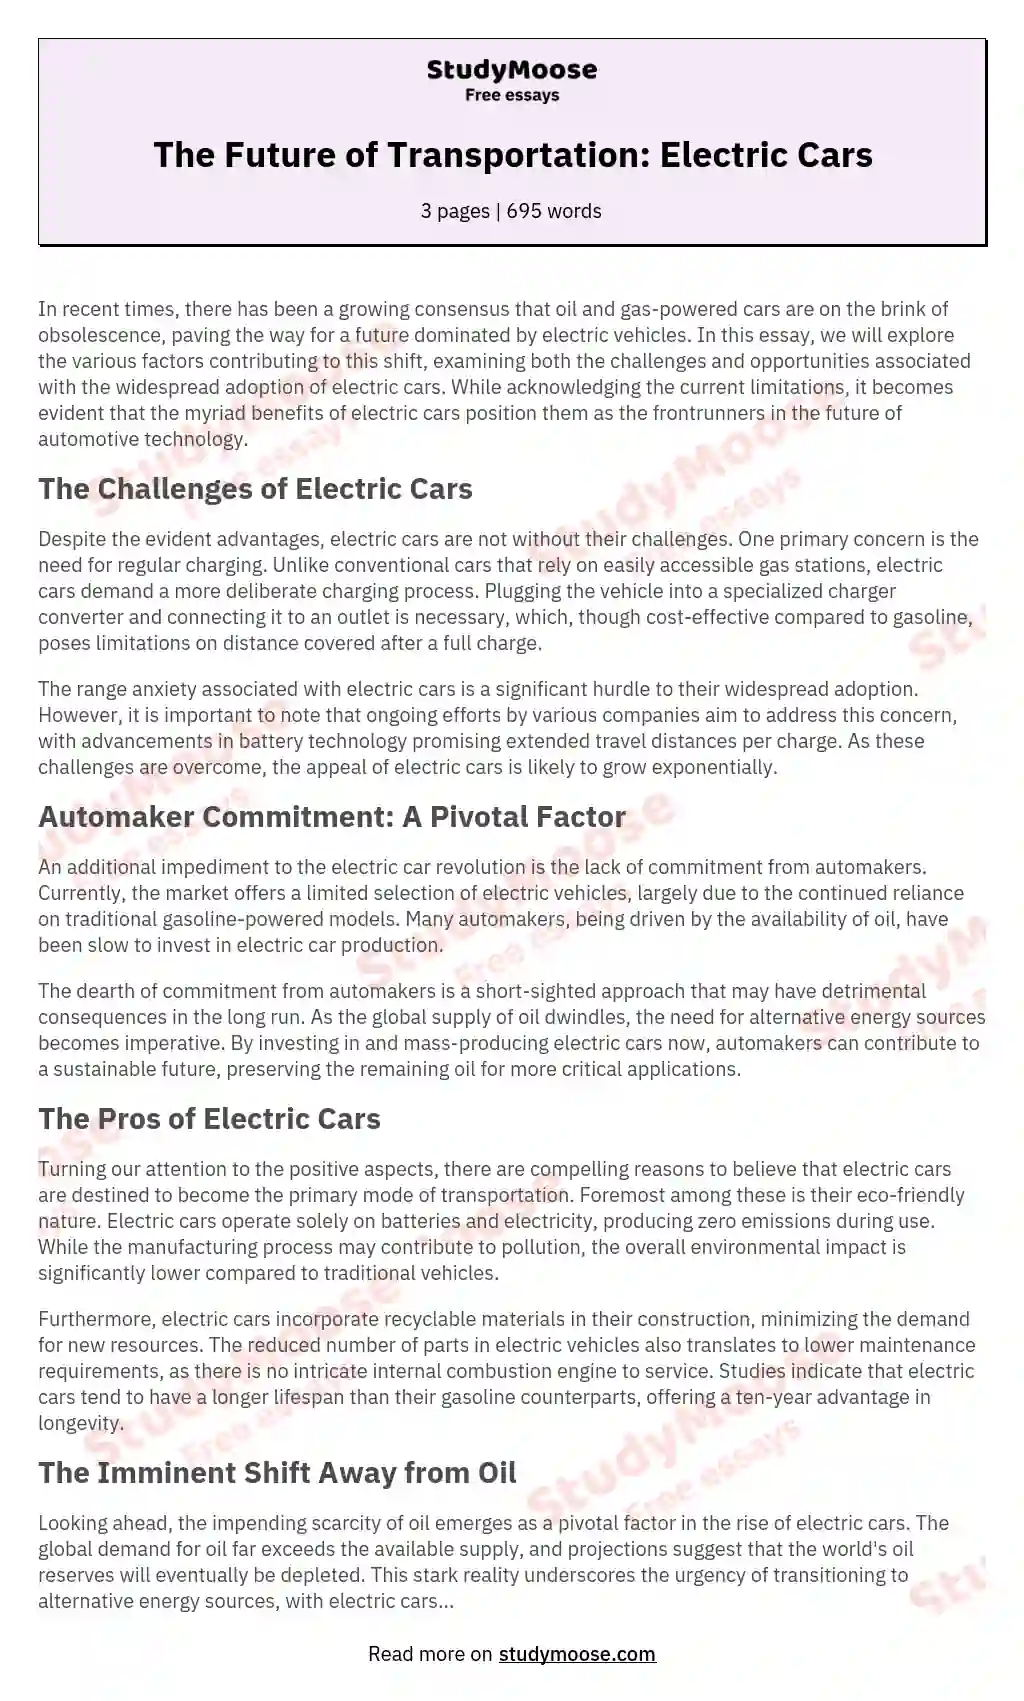 Electric Cars Will Be the Future